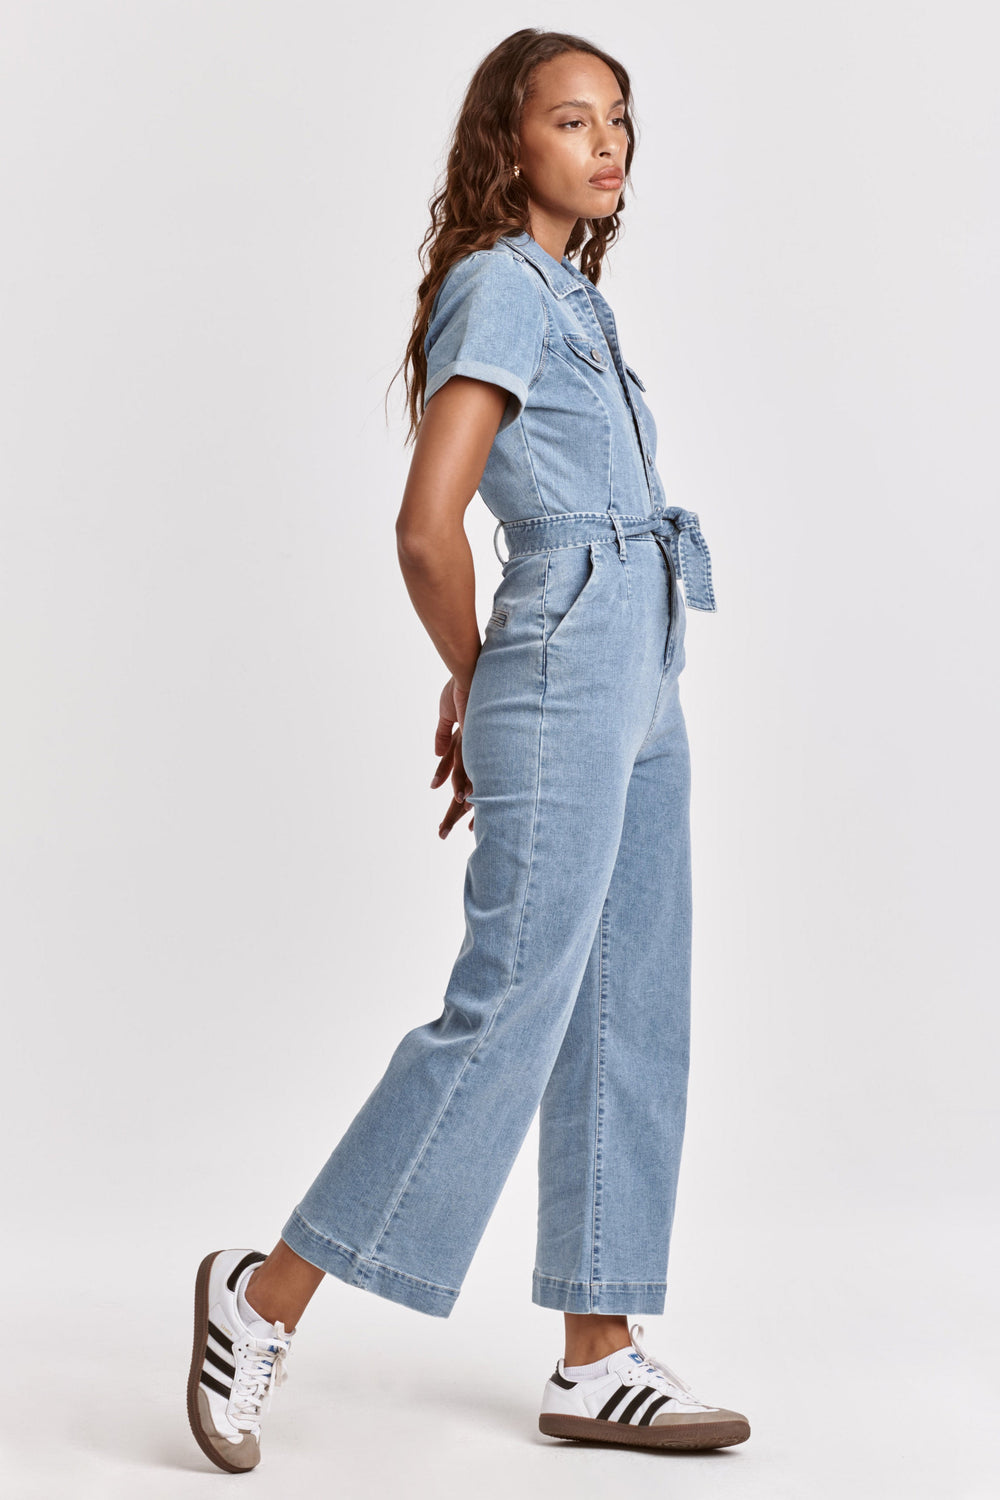 Denim Two Toned Jumpsuit The Perfect Jumpsuit for any Date – Keith &  Kennedy